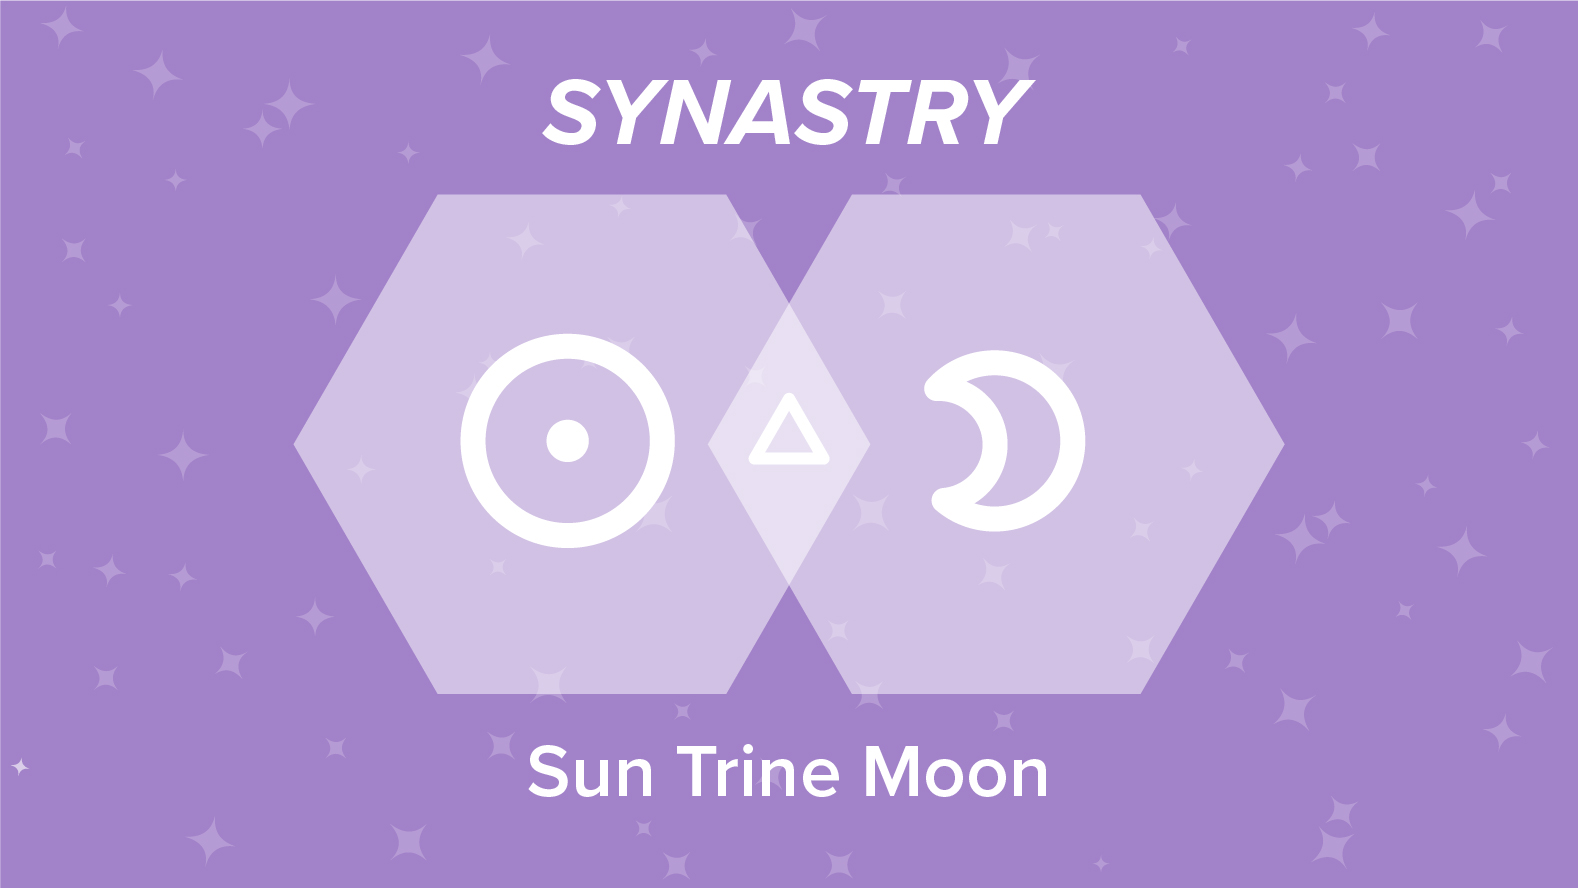 Sun Trine Moon Synastry: Relationships and Friendships Explained